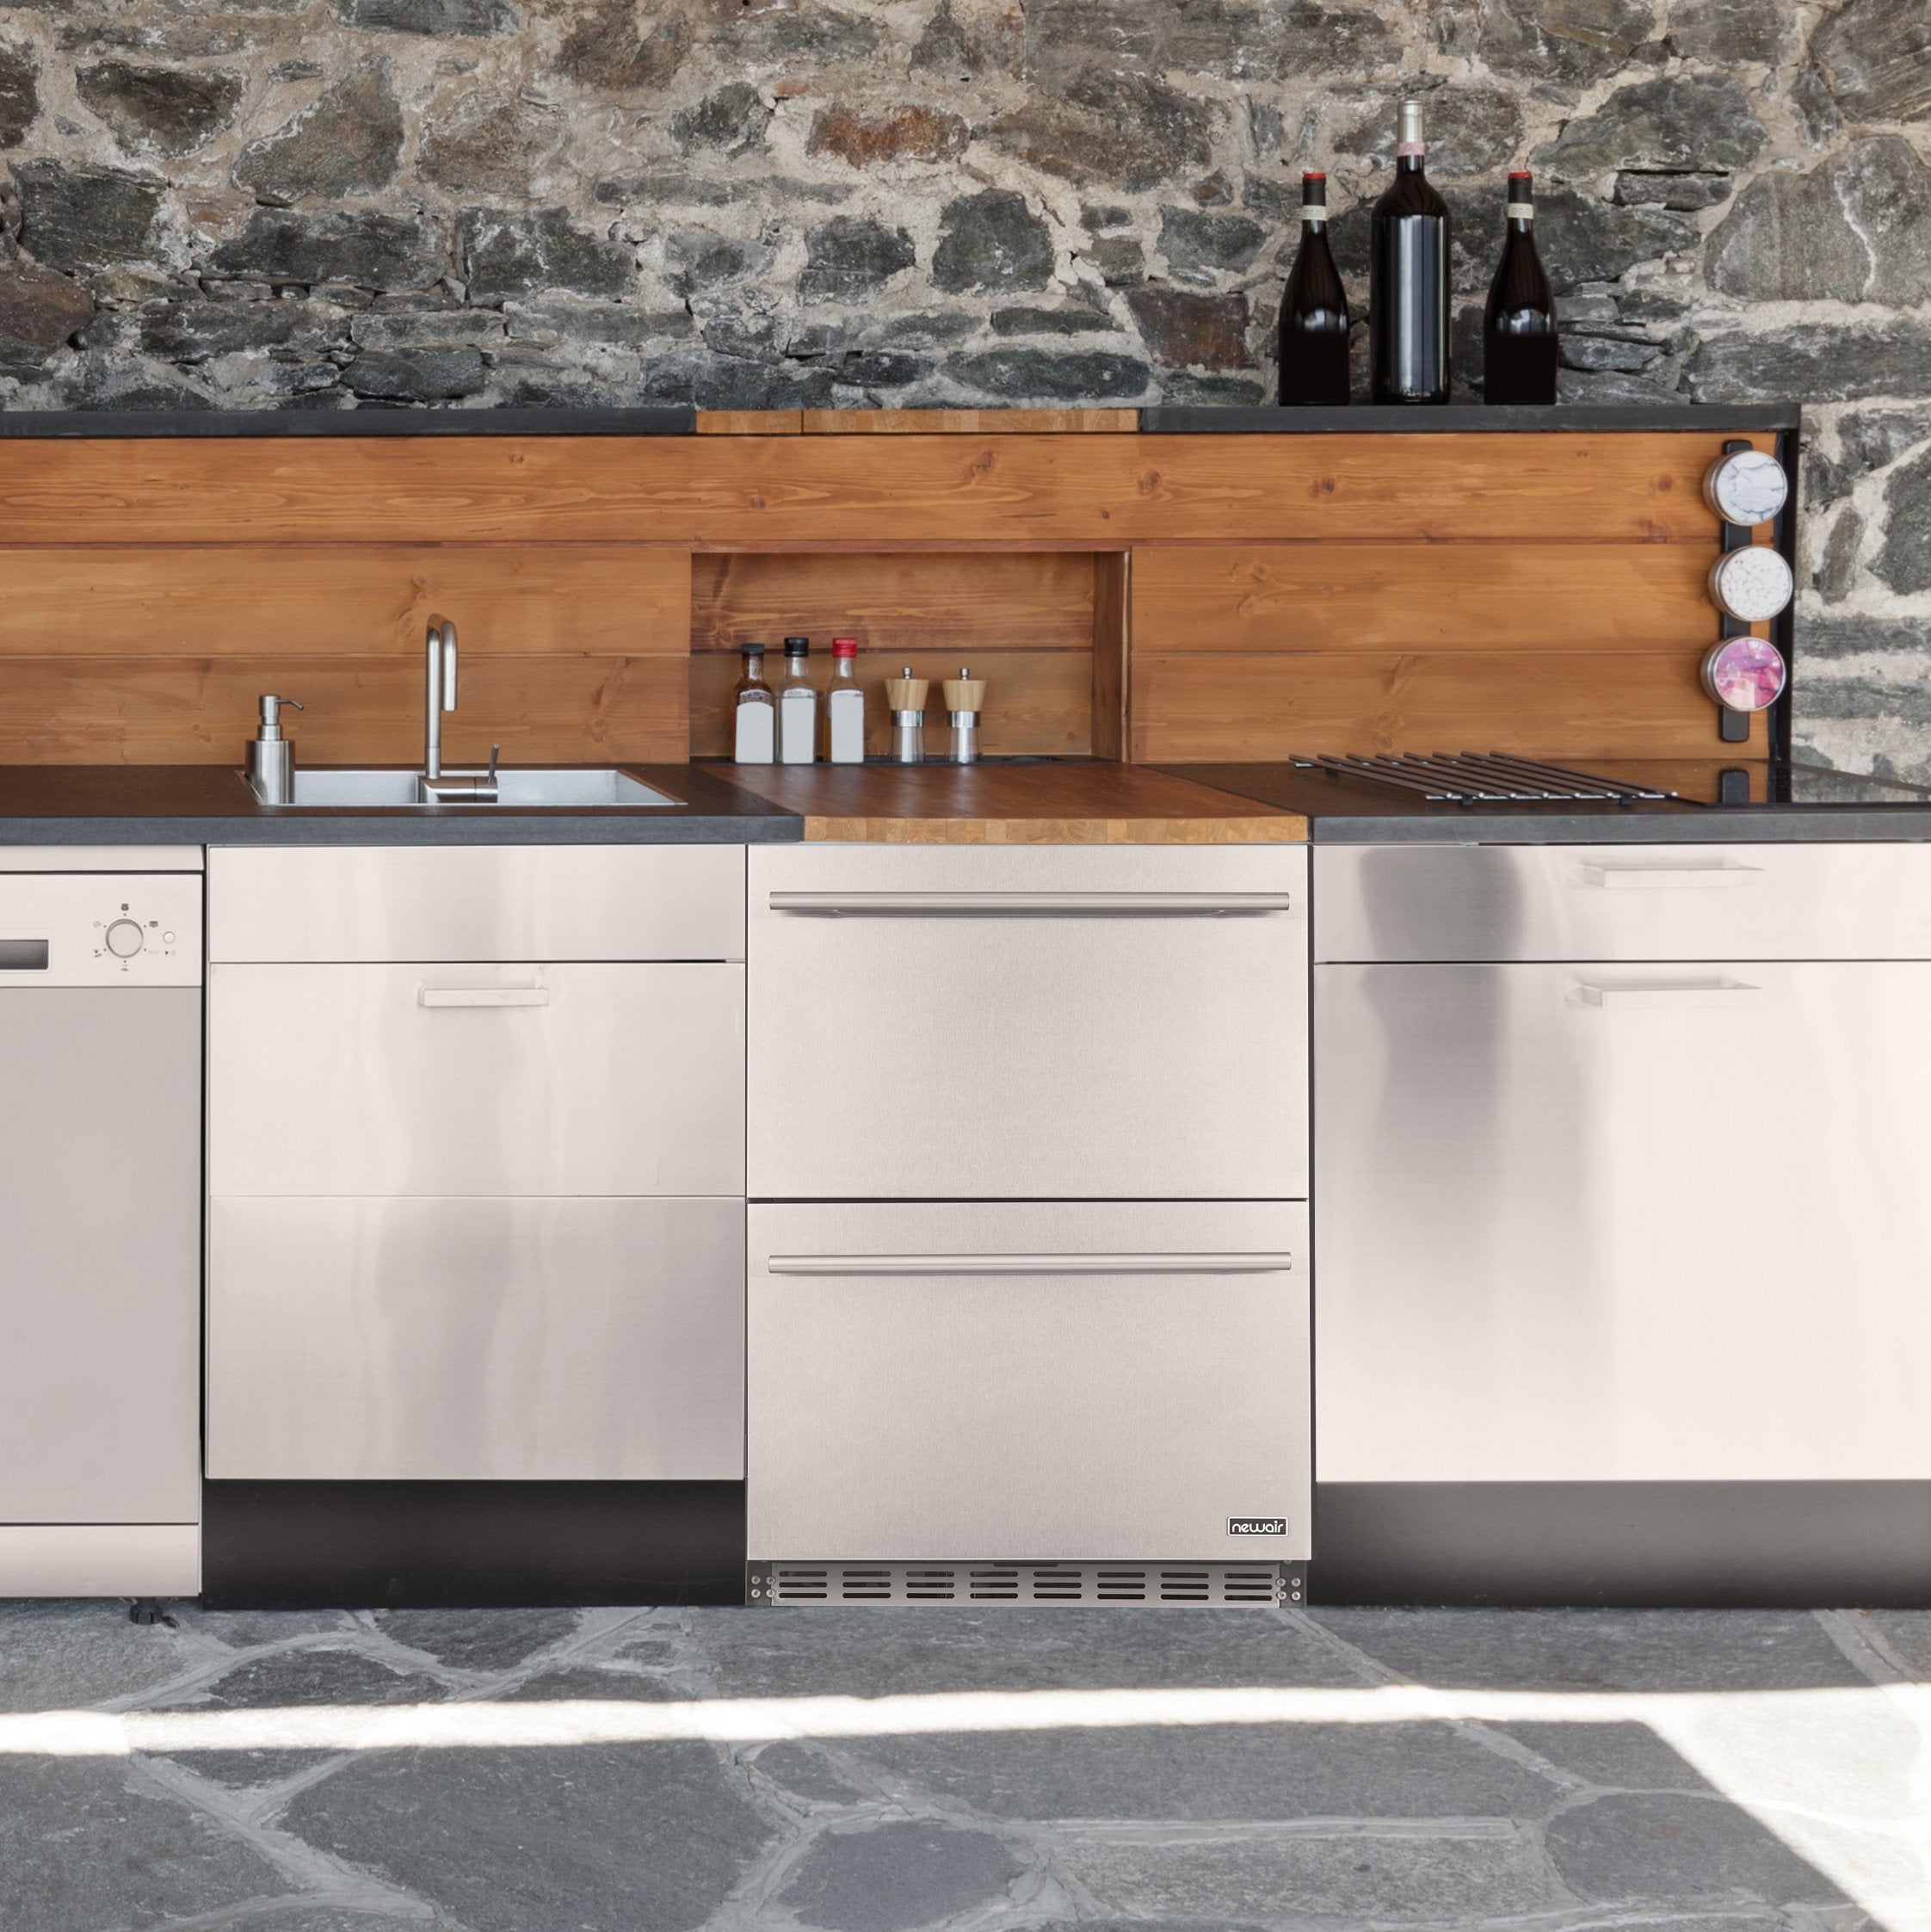 NewAir 24” Built-in 20 Bottle and 80 Can Dual Drawer Indoor/Outdoor Wine and Beverage Fridge